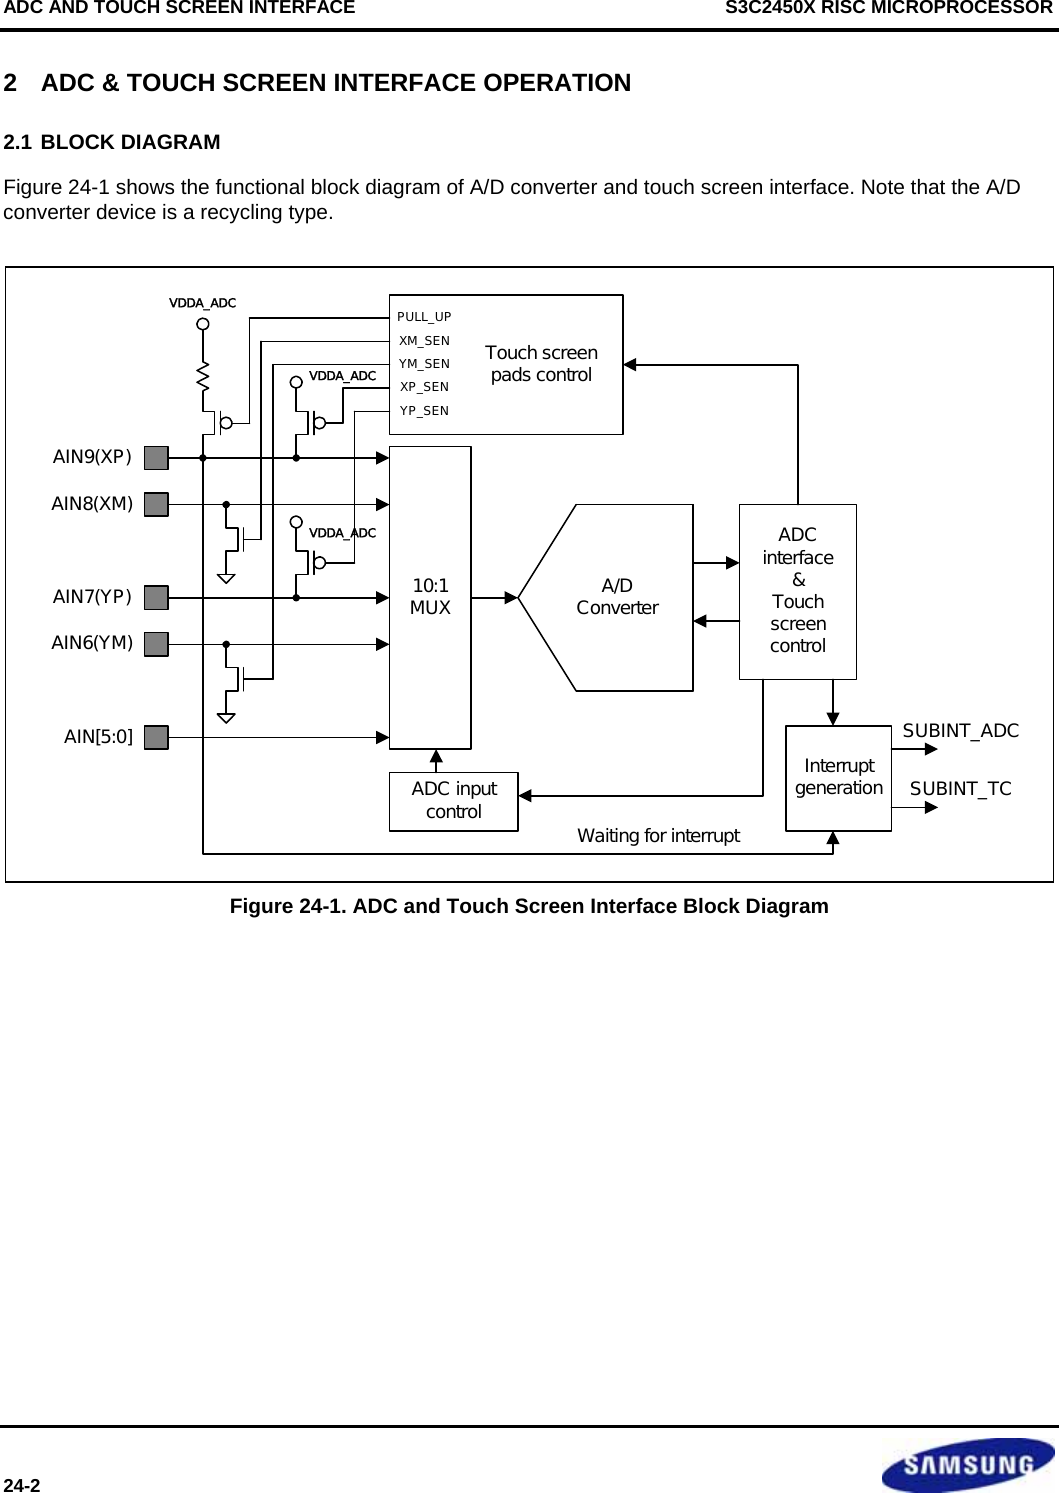 ADC AND TOUCH SCREEN INTERFACE   S3C2450X RISC MICROPROCESSOR 24-2                       2  ADC &amp; TOUCH SCREEN INTERFACE OPERATION 2.1 BLOCK DIAGRAM Figure 24-1 shows the functional block diagram of A/D converter and touch screen interface. Note that the A/D converter device is a recycling type. 10:1MUXPULL_UPXM_SENYM_SENXP_SENYP_SENTouch screenpads controlA/DConverterADC interface&amp; Touch screen controlADC input controlInterrupt generationSUBINT_ADCSUBINT_TCWaiting for interruptVDDA_ADCVDDA_ADCAIN9(XP)AIN8(XM)AIN7(YP)AIN6(YM)AIN[5:0]VDDA_ADC Figure 24-1. ADC and Touch Screen Interface Block Diagram 